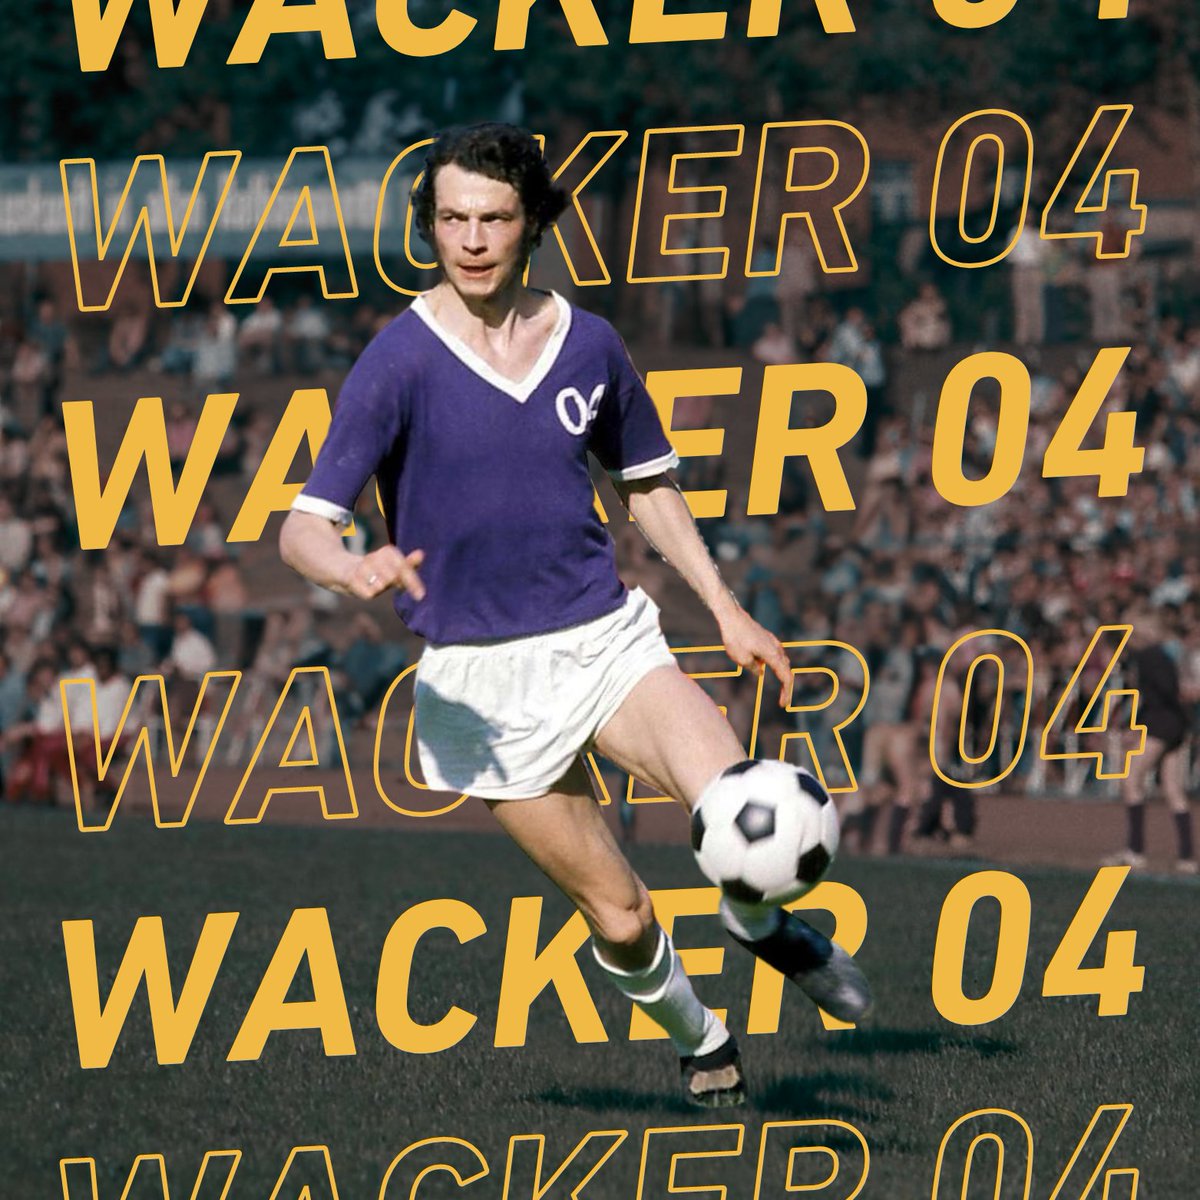 🇩🇪 Wacker 04 Berlin Despite playing at the highest level of football in Berlin from 1933 and being a founding member of the 2. Bundesliga in 1974, Wacker 04 Berlin failed to win any major honours and lived in mediocrity through much of their existence. They did however manage